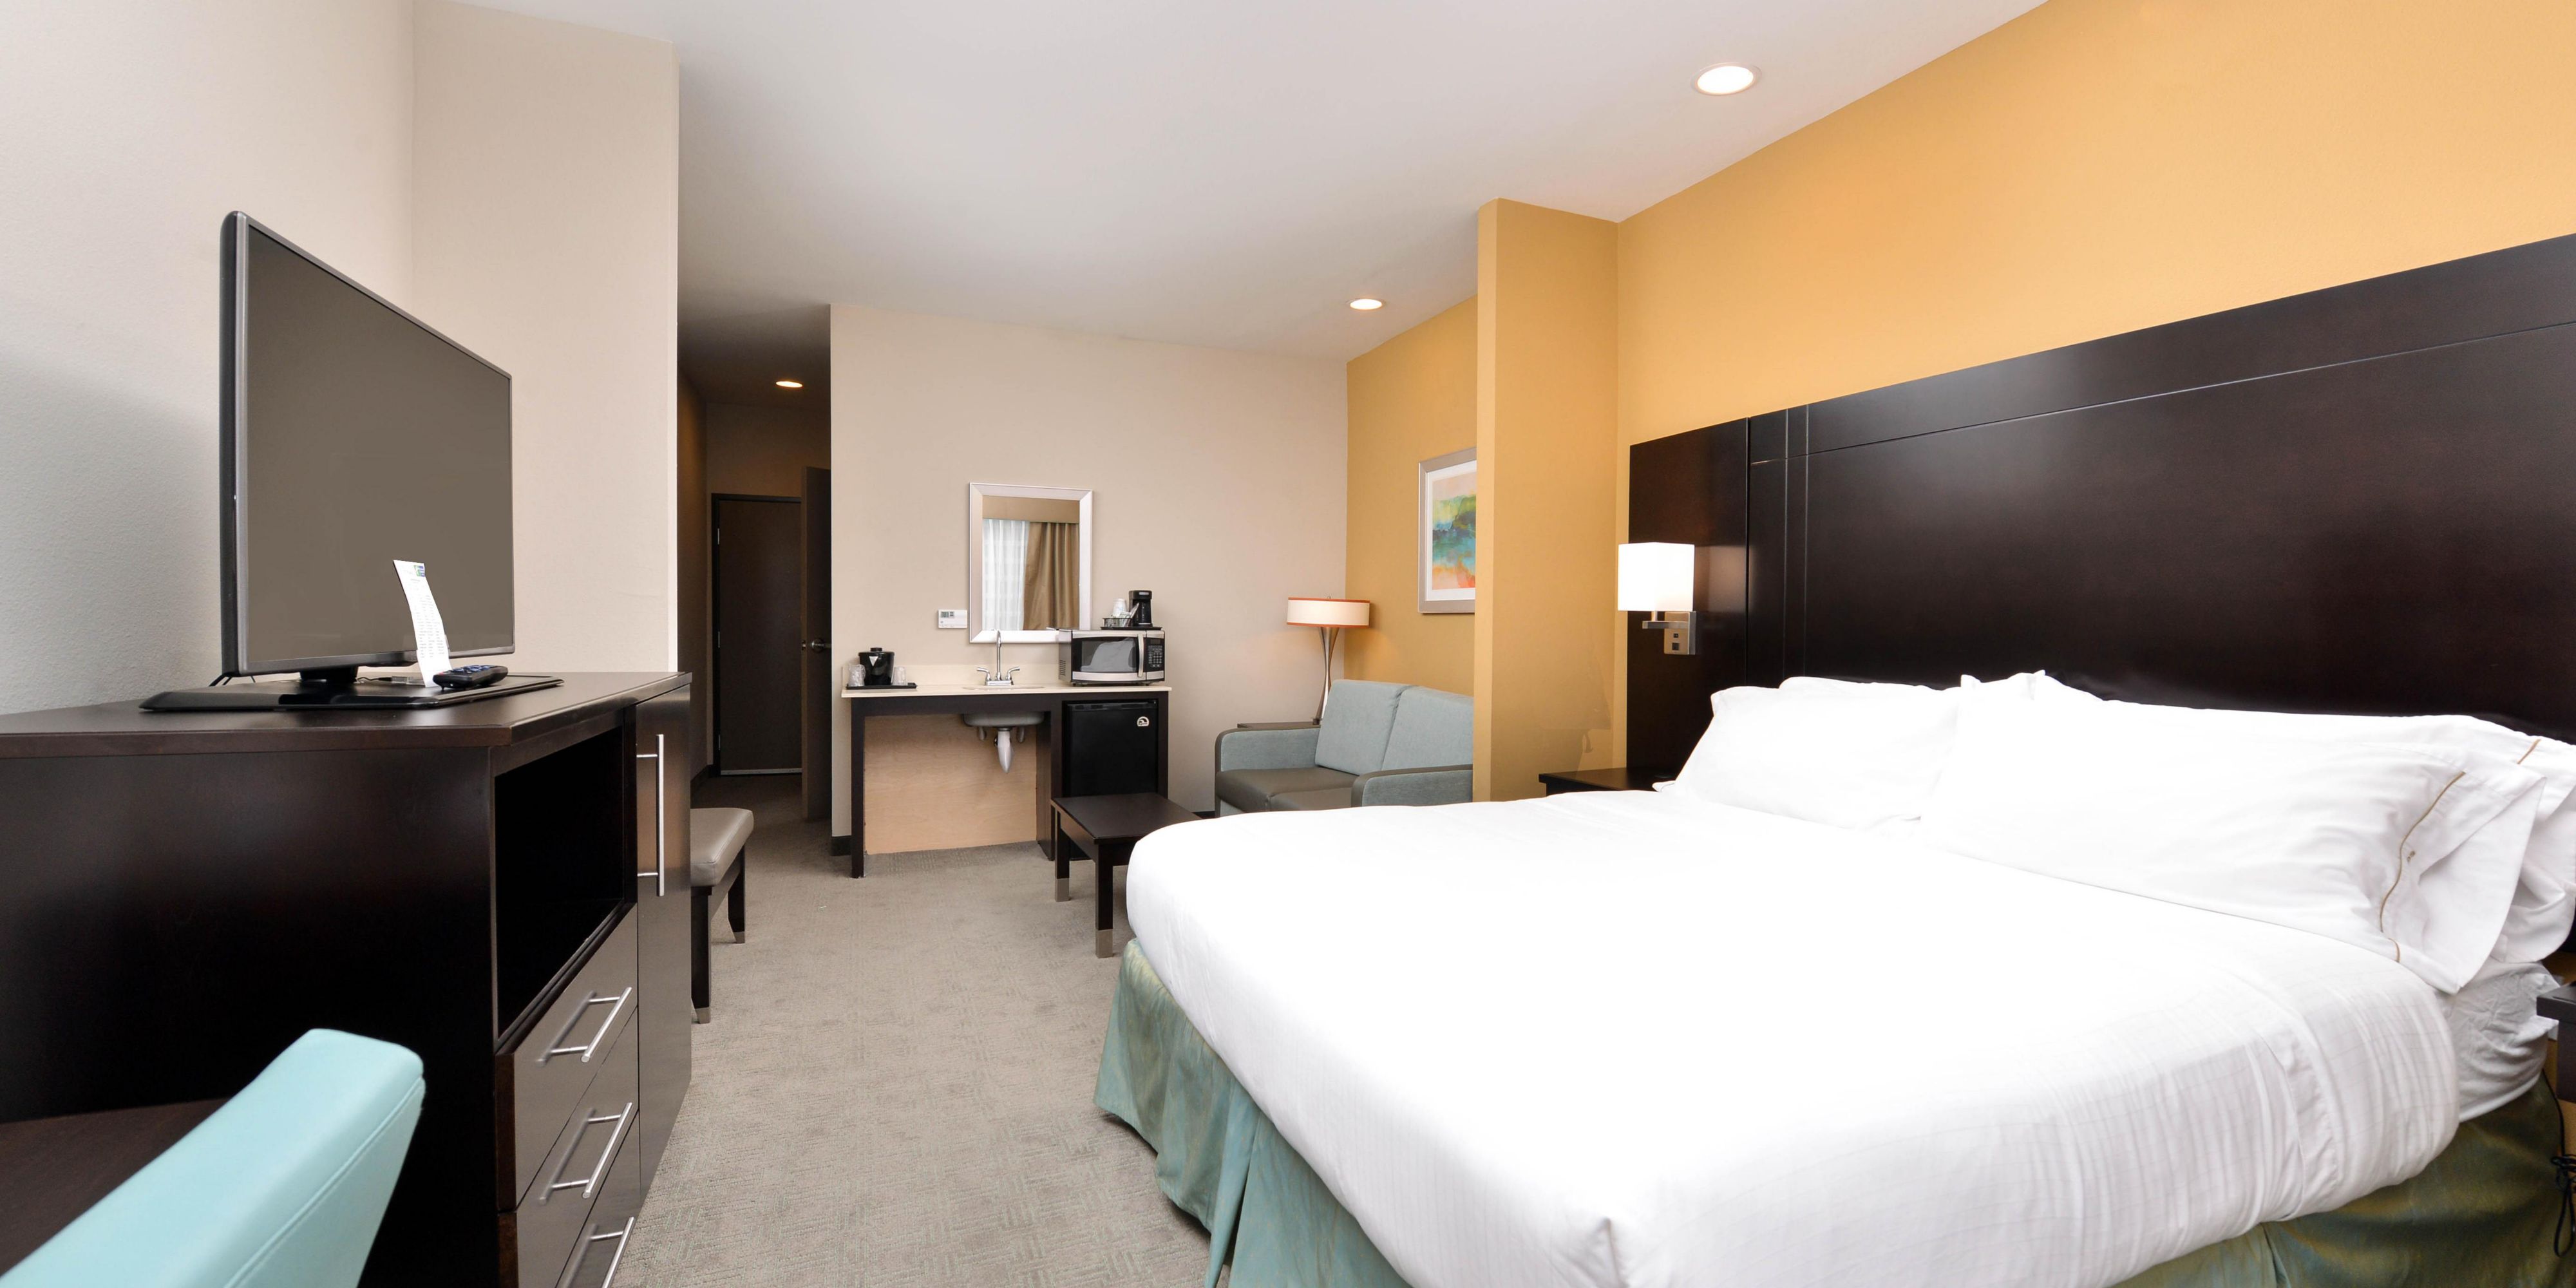 Enjoy a comfy night in our modern air conditioned bedrooms which feature appealing amenities such as Smart TVs, a choice of three pillow types, black out blinds, a flexible ergonomic work station and handy USB portals. After a good night's sleep, get ready to kick your day with our Free Express Start breakfast!
